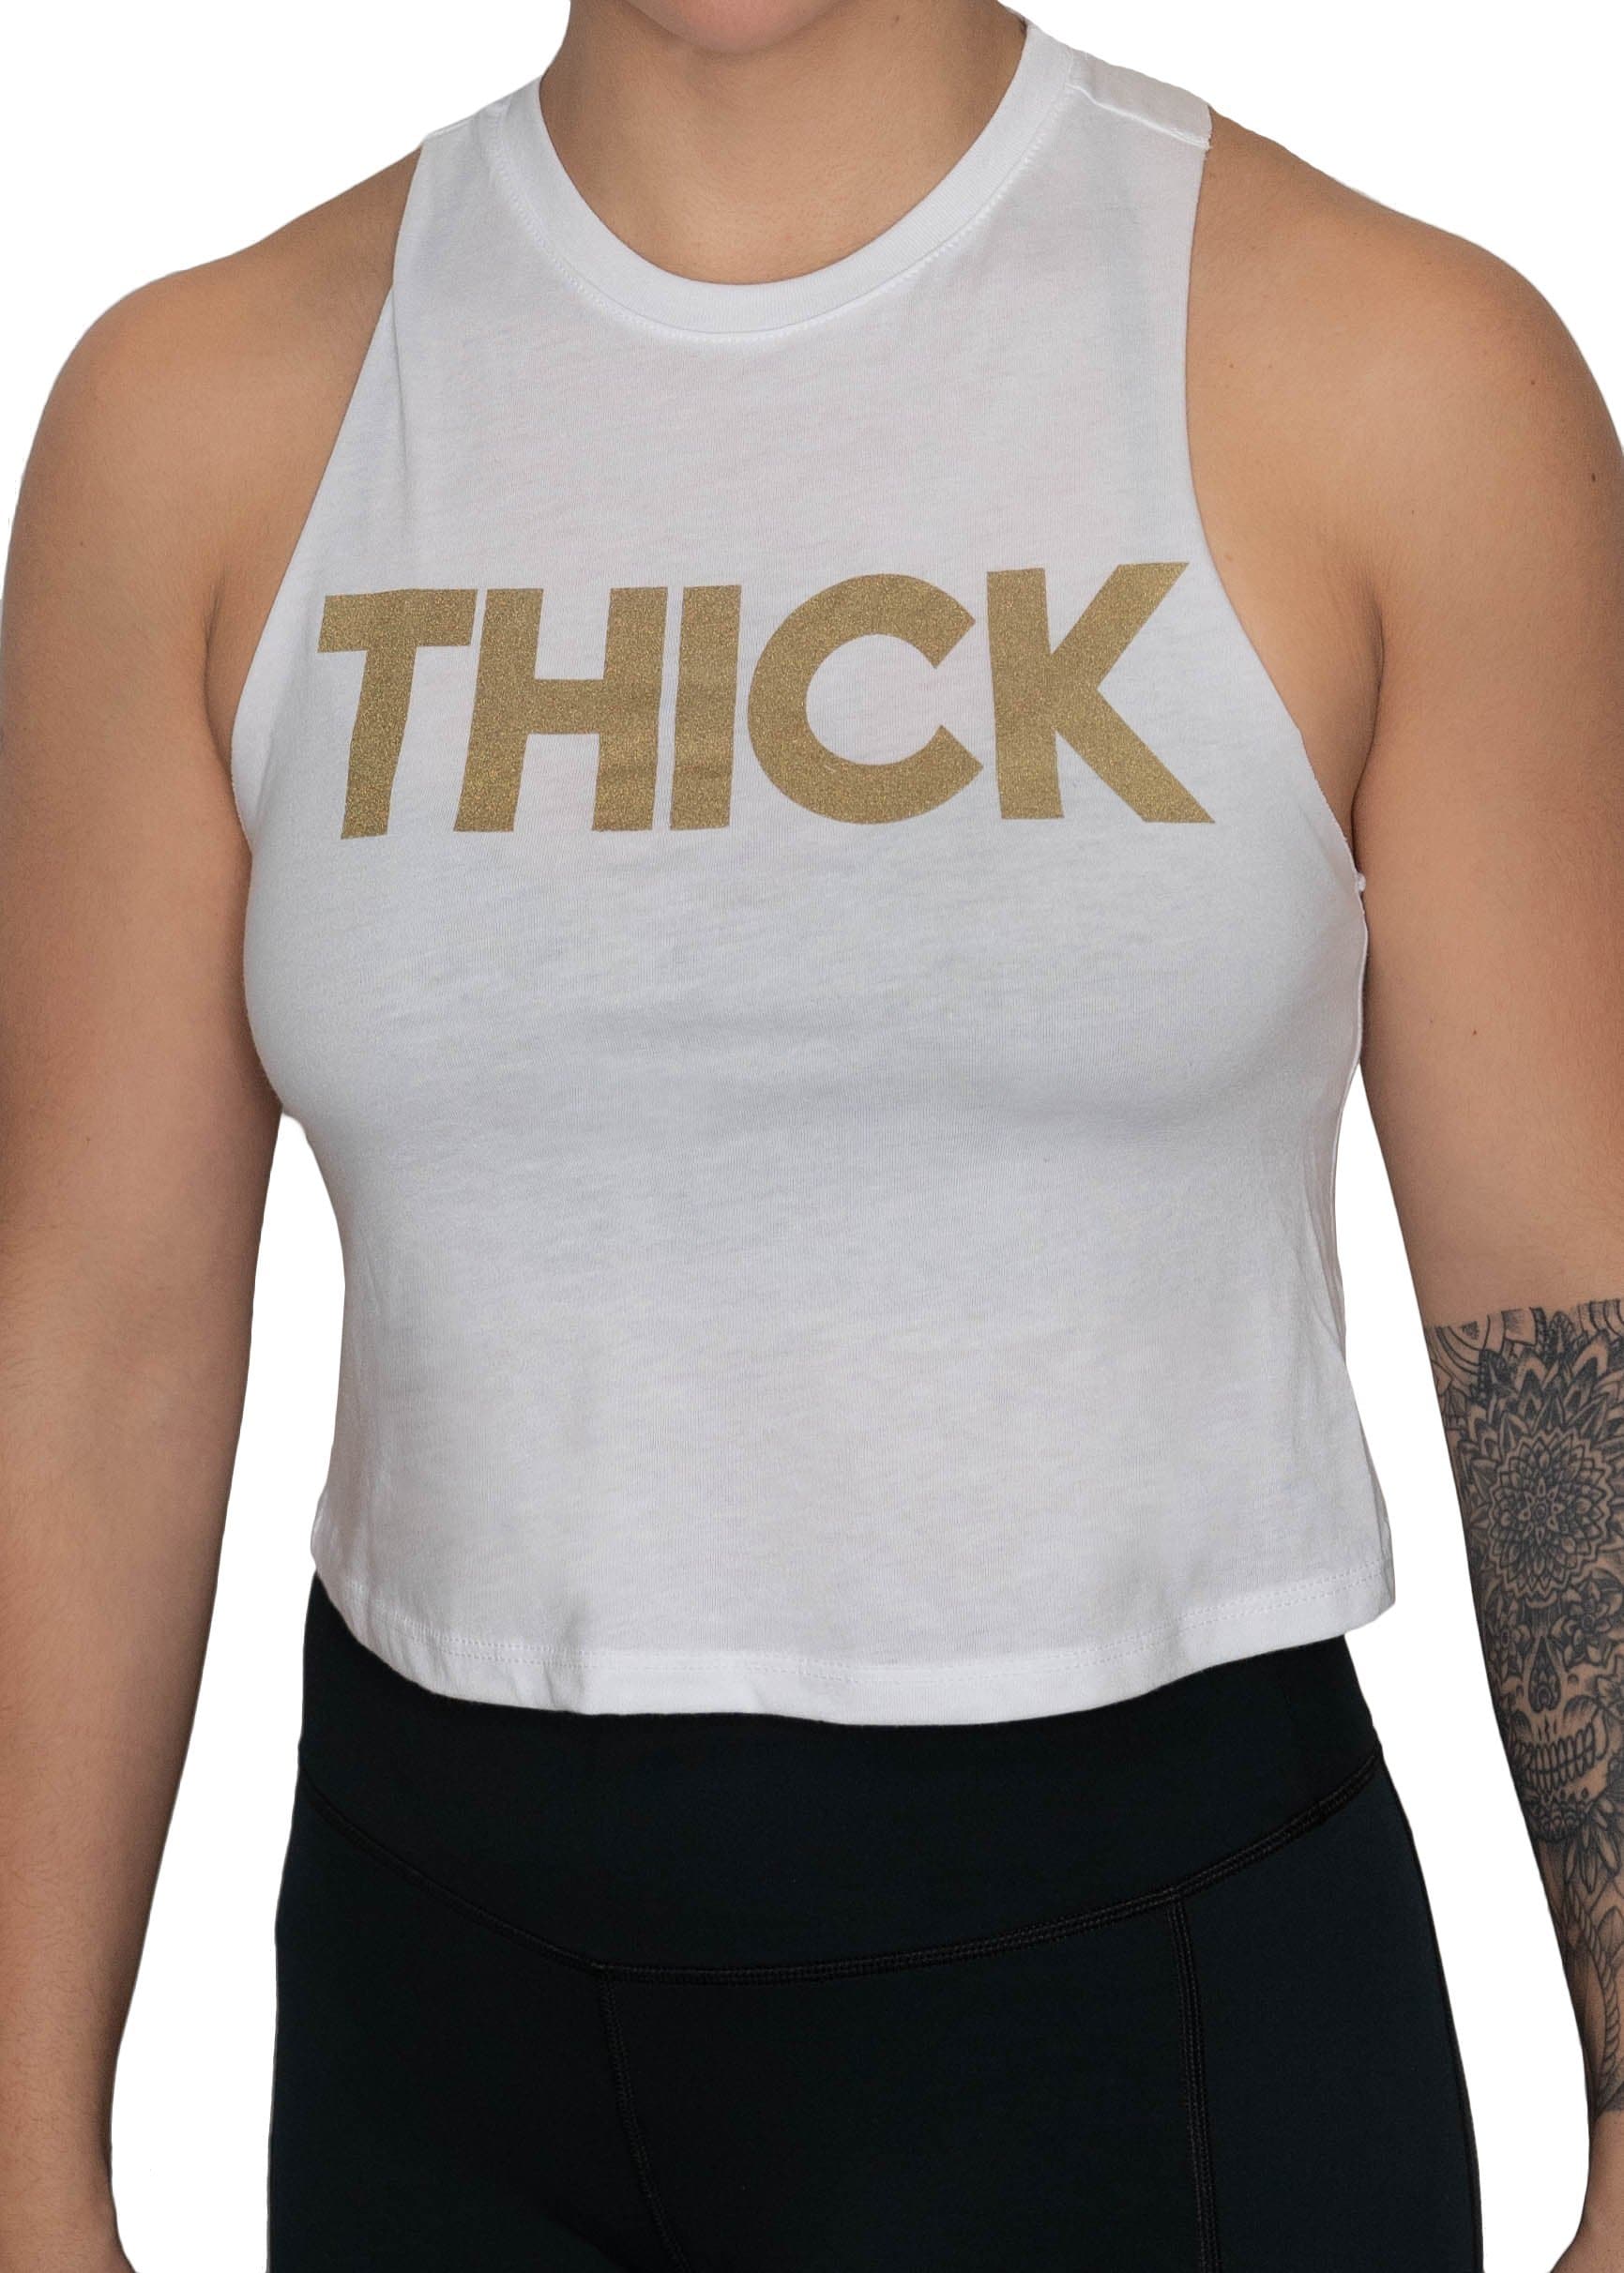 Feed Me Fight Me THICK Tank (White/Gold) - 9 for 9